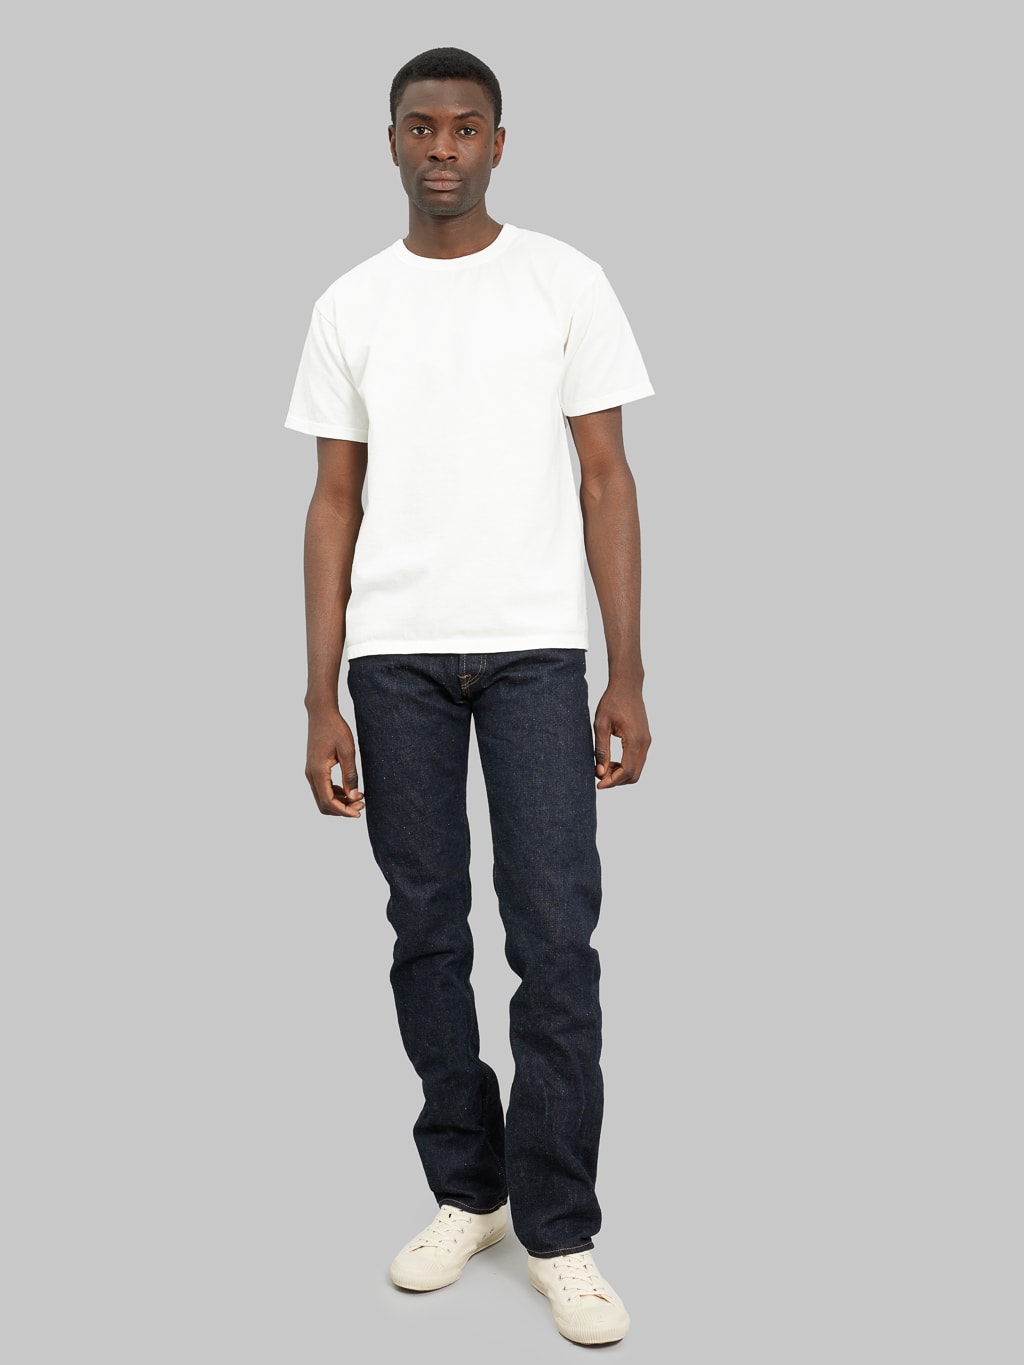 5 White Oak Denim Jeans You Need in Your Collection! - Rope Dye